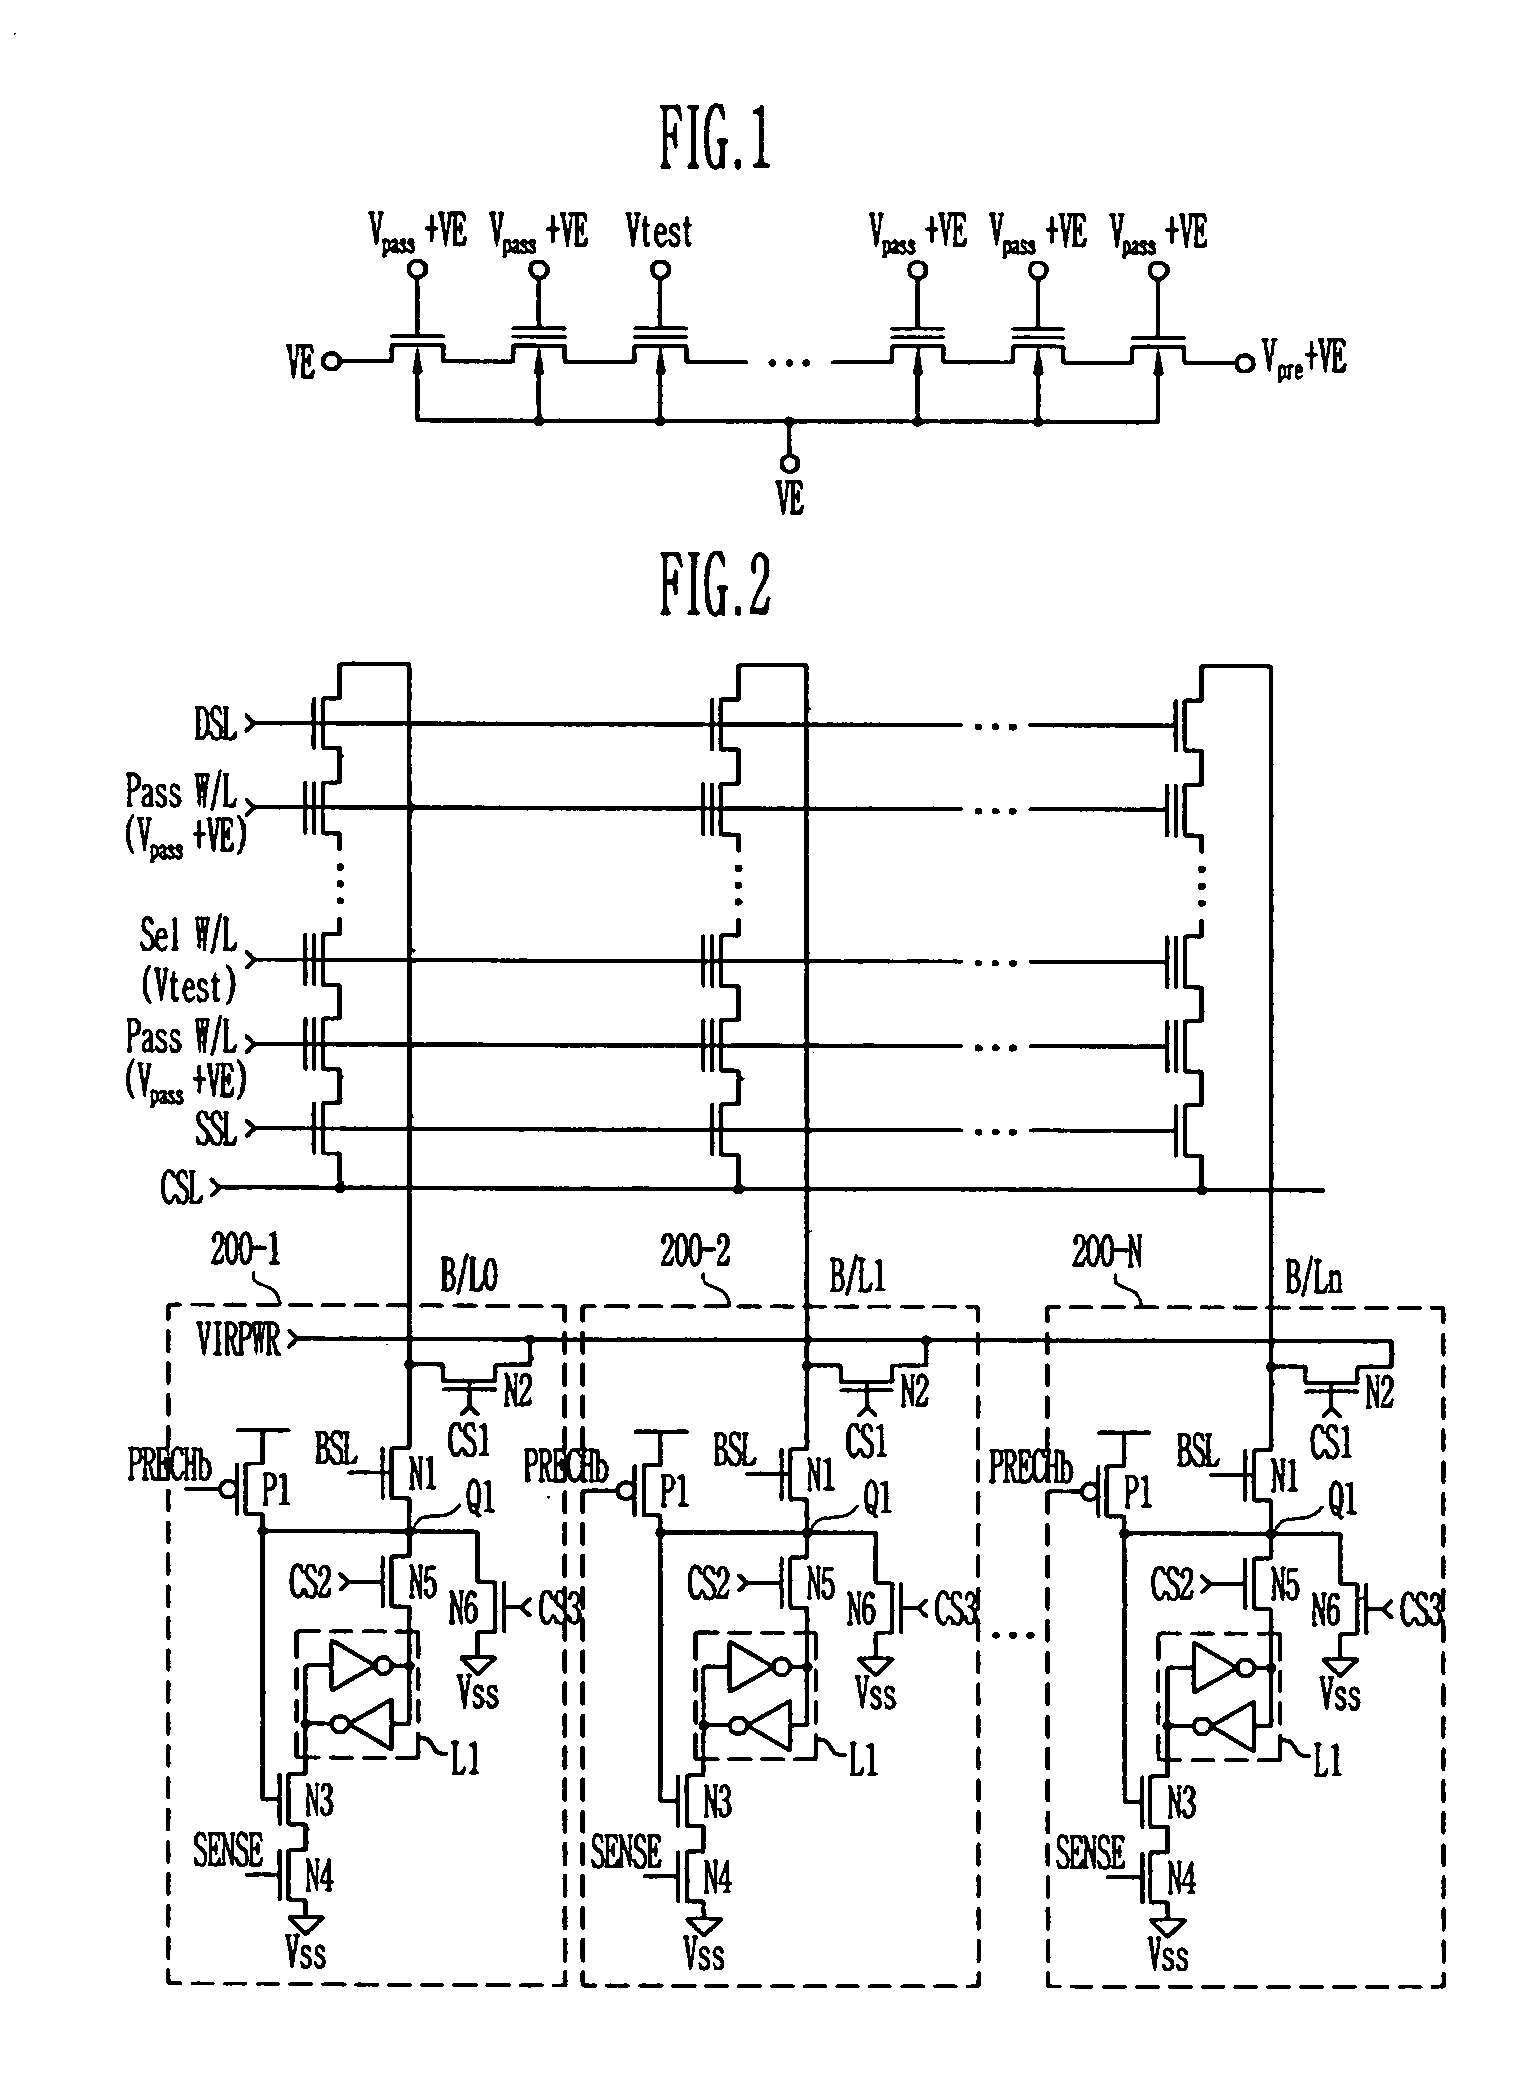 Method of measuring threshold voltage for a NAND flash memory device